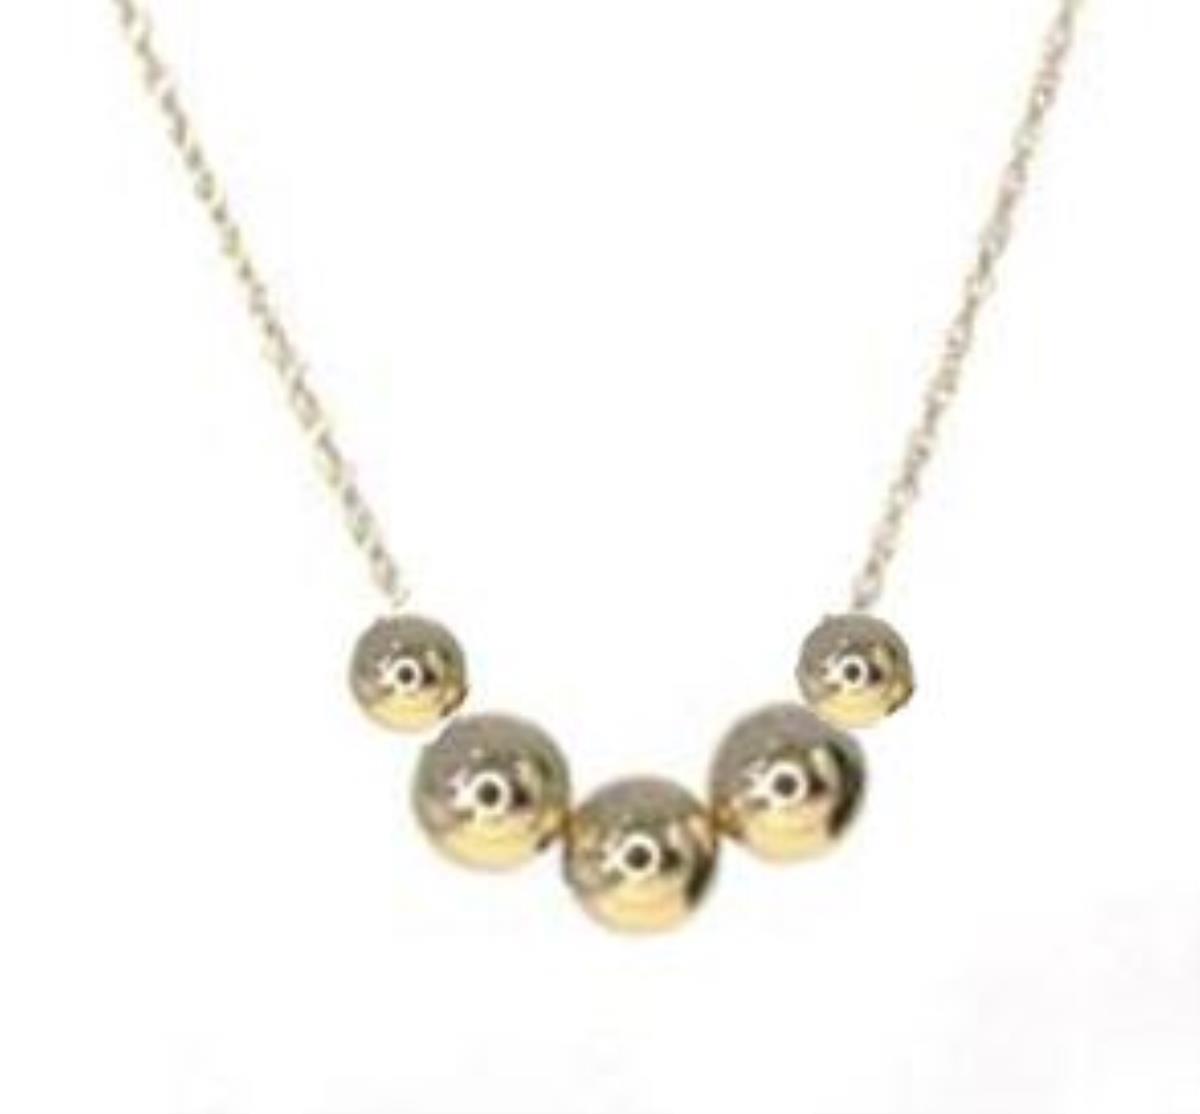 10K Yellow Gold 5,6,7mm Five Polished Graduated Bead Ball 18" Necklace